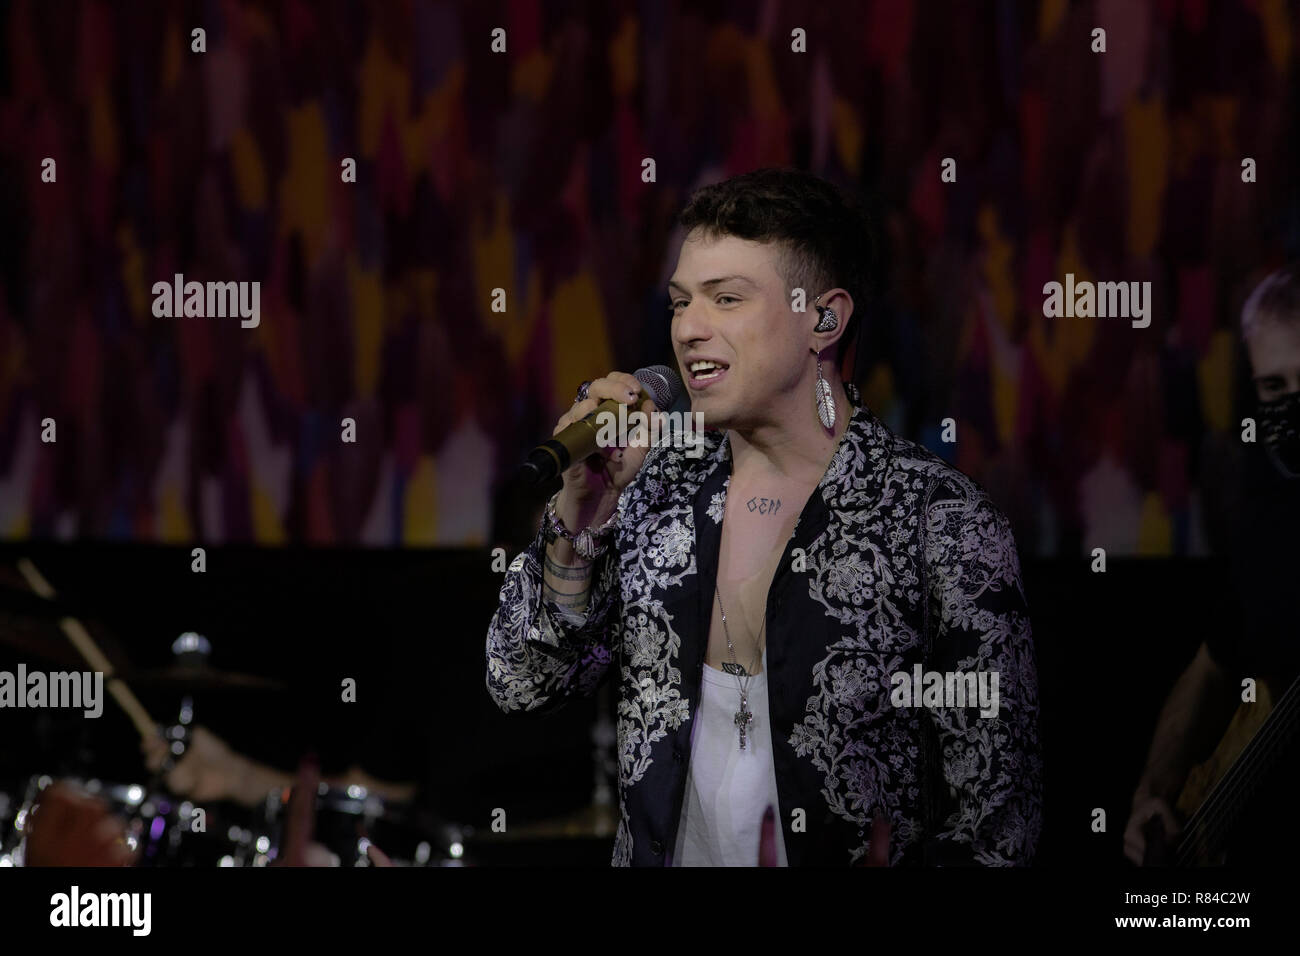 Napoli, Italy. 19th Mar, 2017. Irama is an Italian songwriter, who took part in Amici, performs live at Duel Beat in Napoli with "Giovani per sempre tour". Credit: Francesco Cigliano/Pacific Press/Alamy Live News Stock Photo